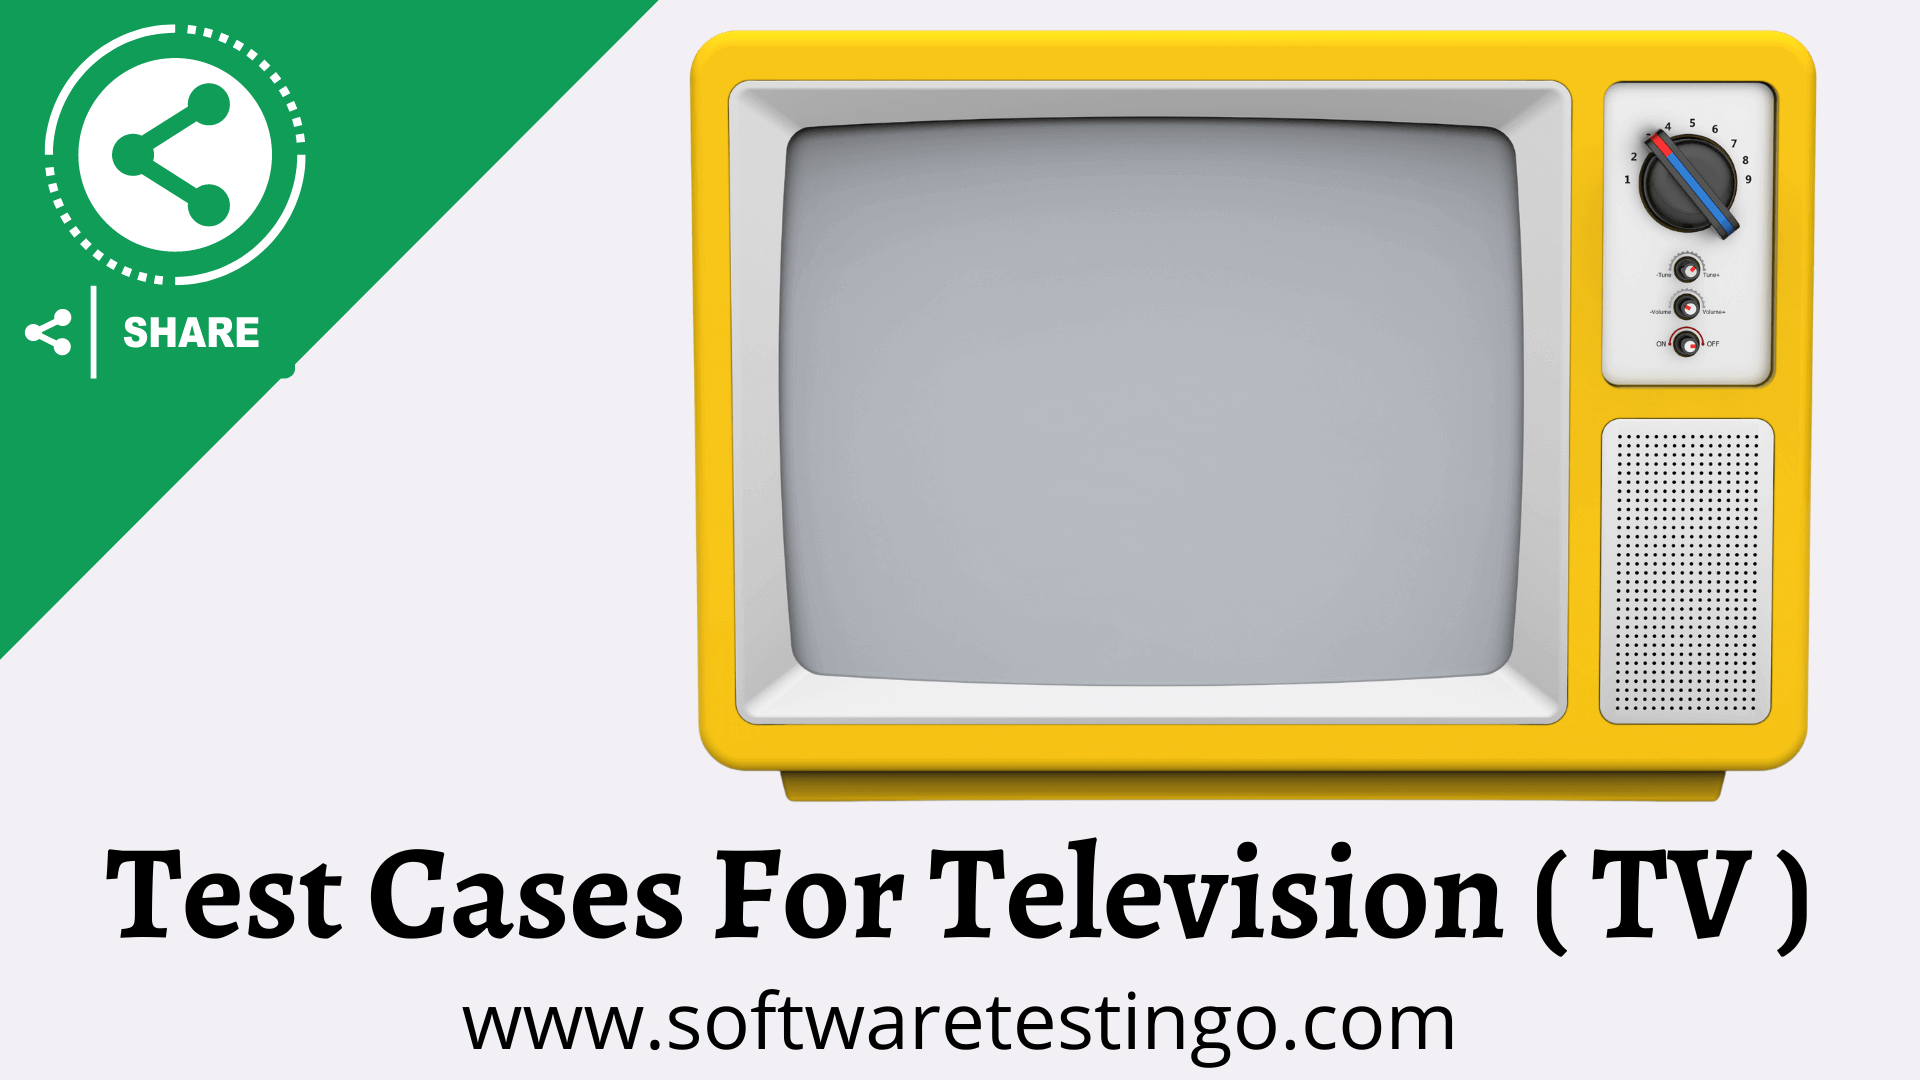 Test Cases For Television ( TV )